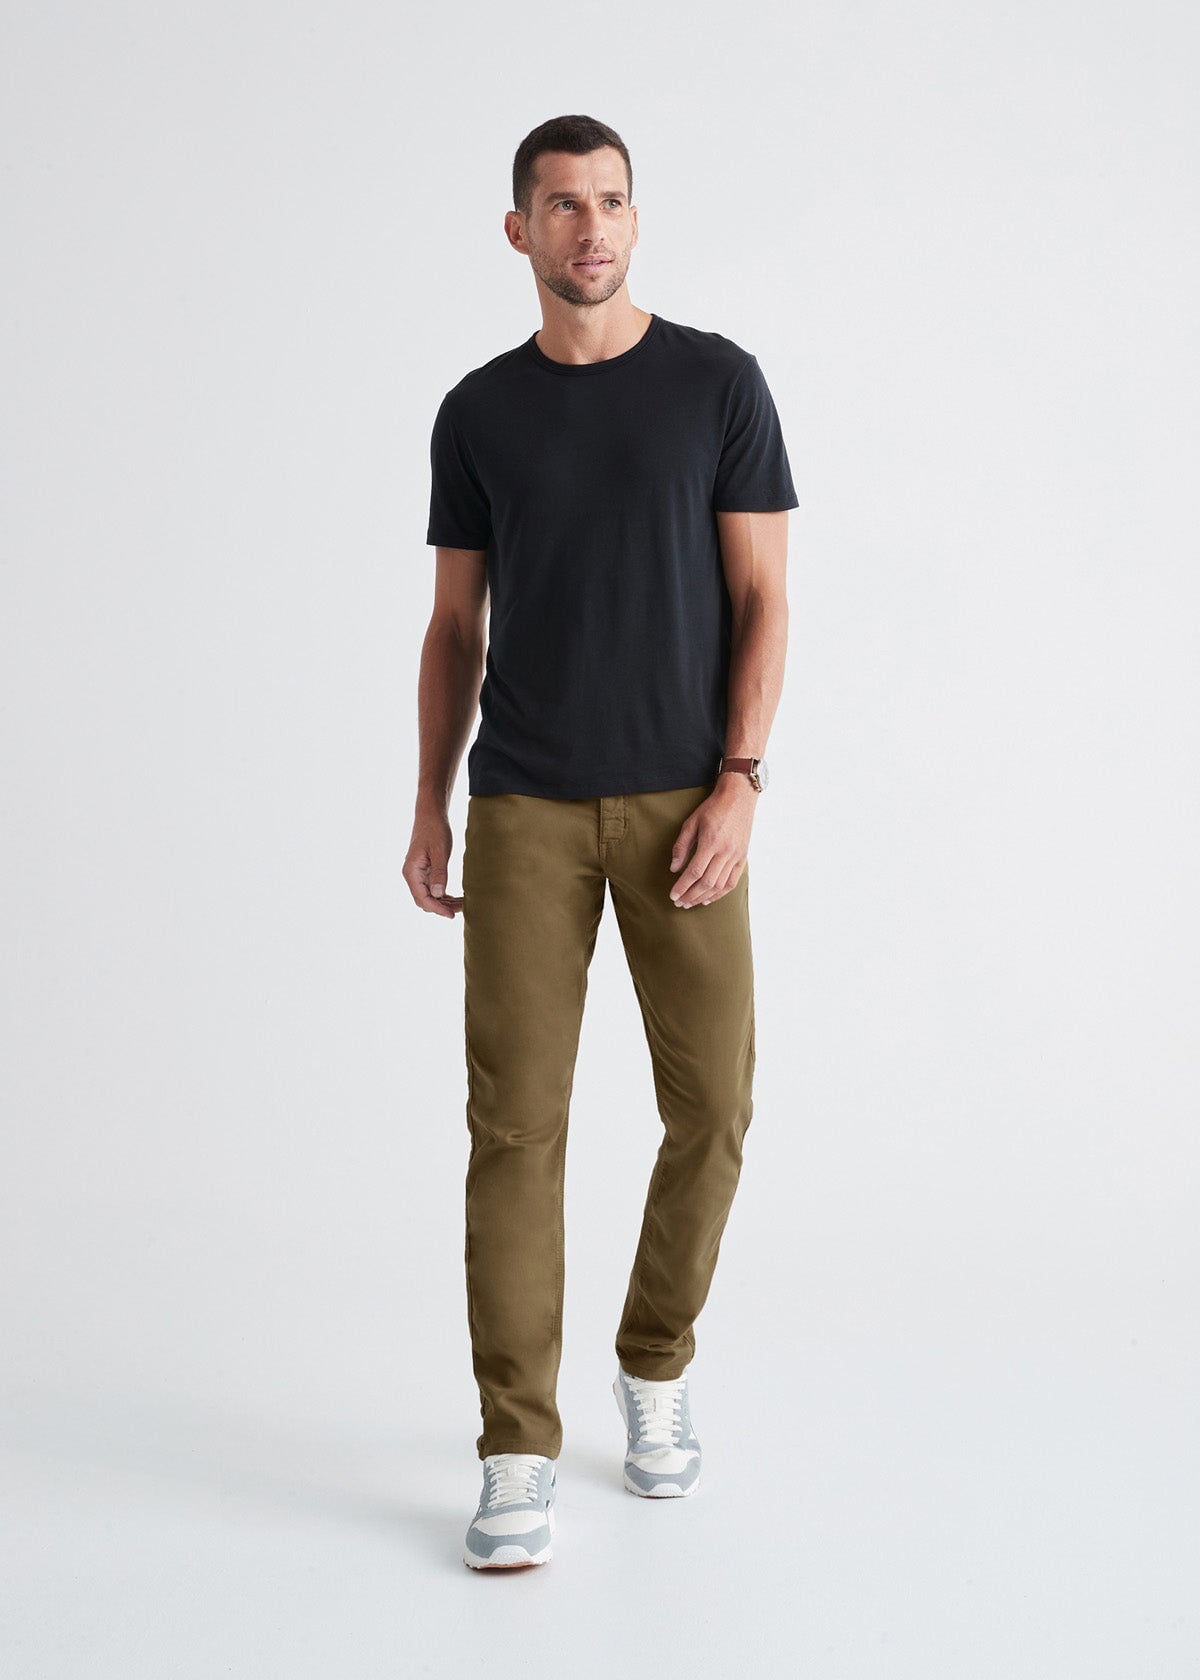 DUER Men's No Sweat Pant Relaxed - True Outdoors